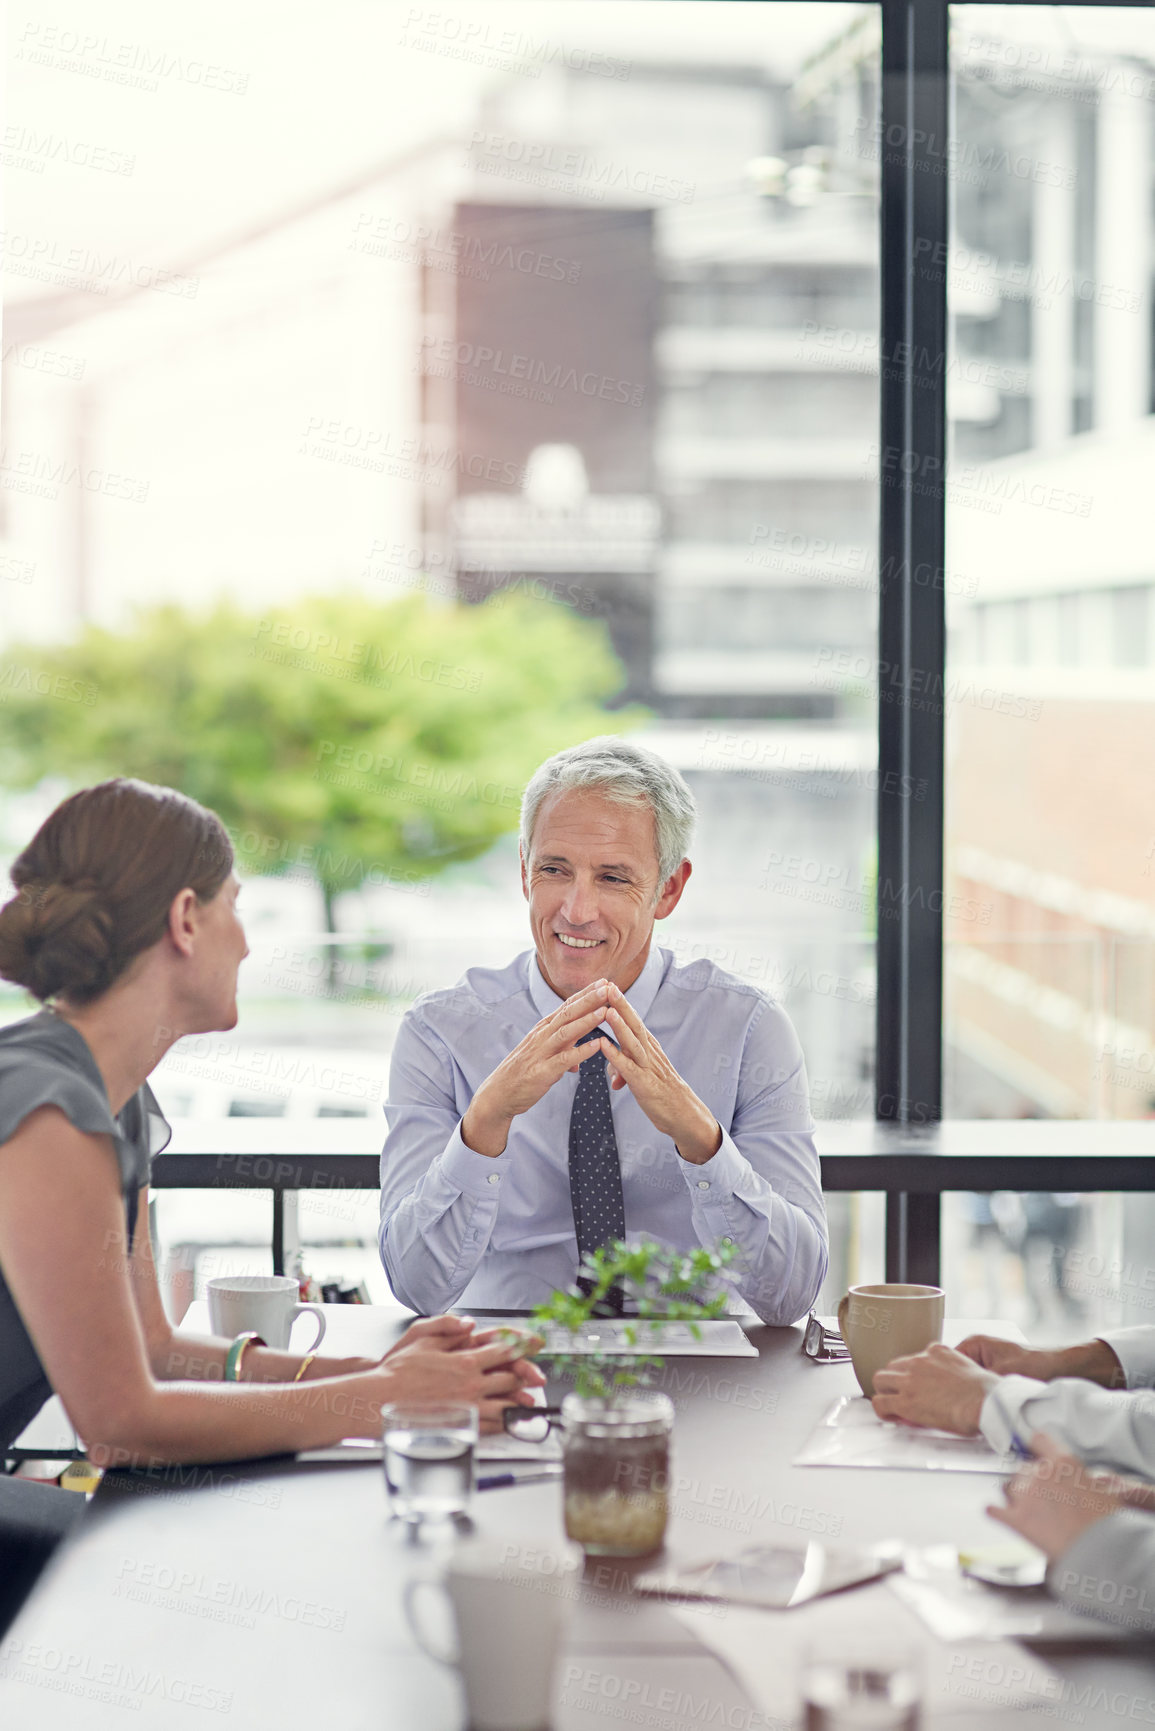 Buy stock photo Cropped shot of a businessman leading a discussion in the boardroom